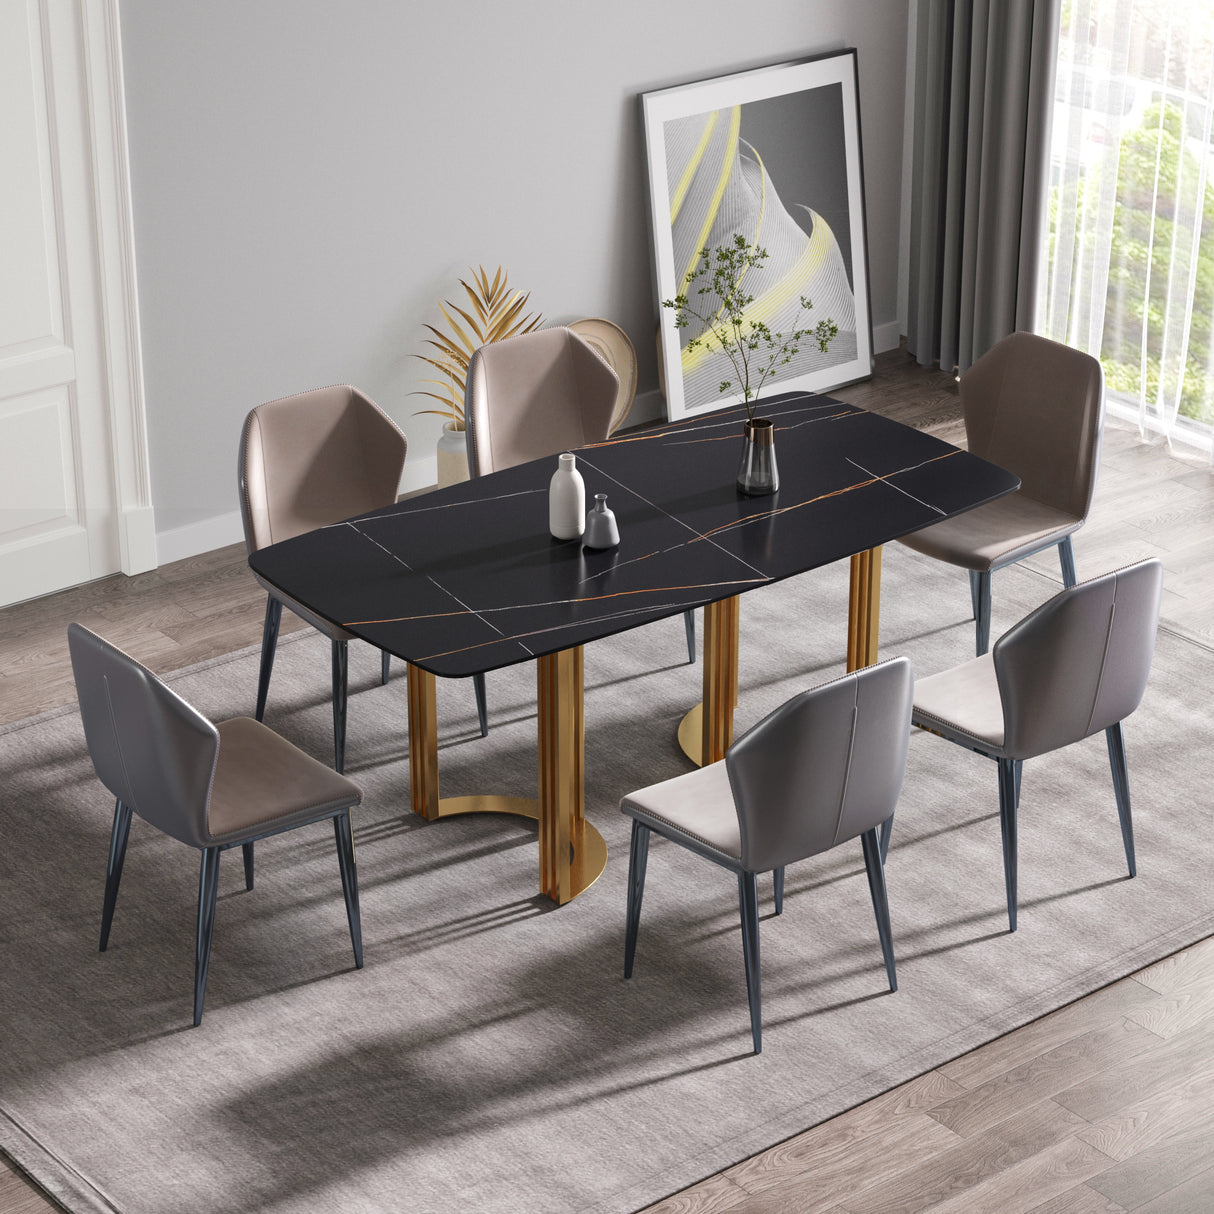 70.87"Modern artificial stone black curved golden metal leg dining table-can accommodate 6-8 people - Home Elegance USA